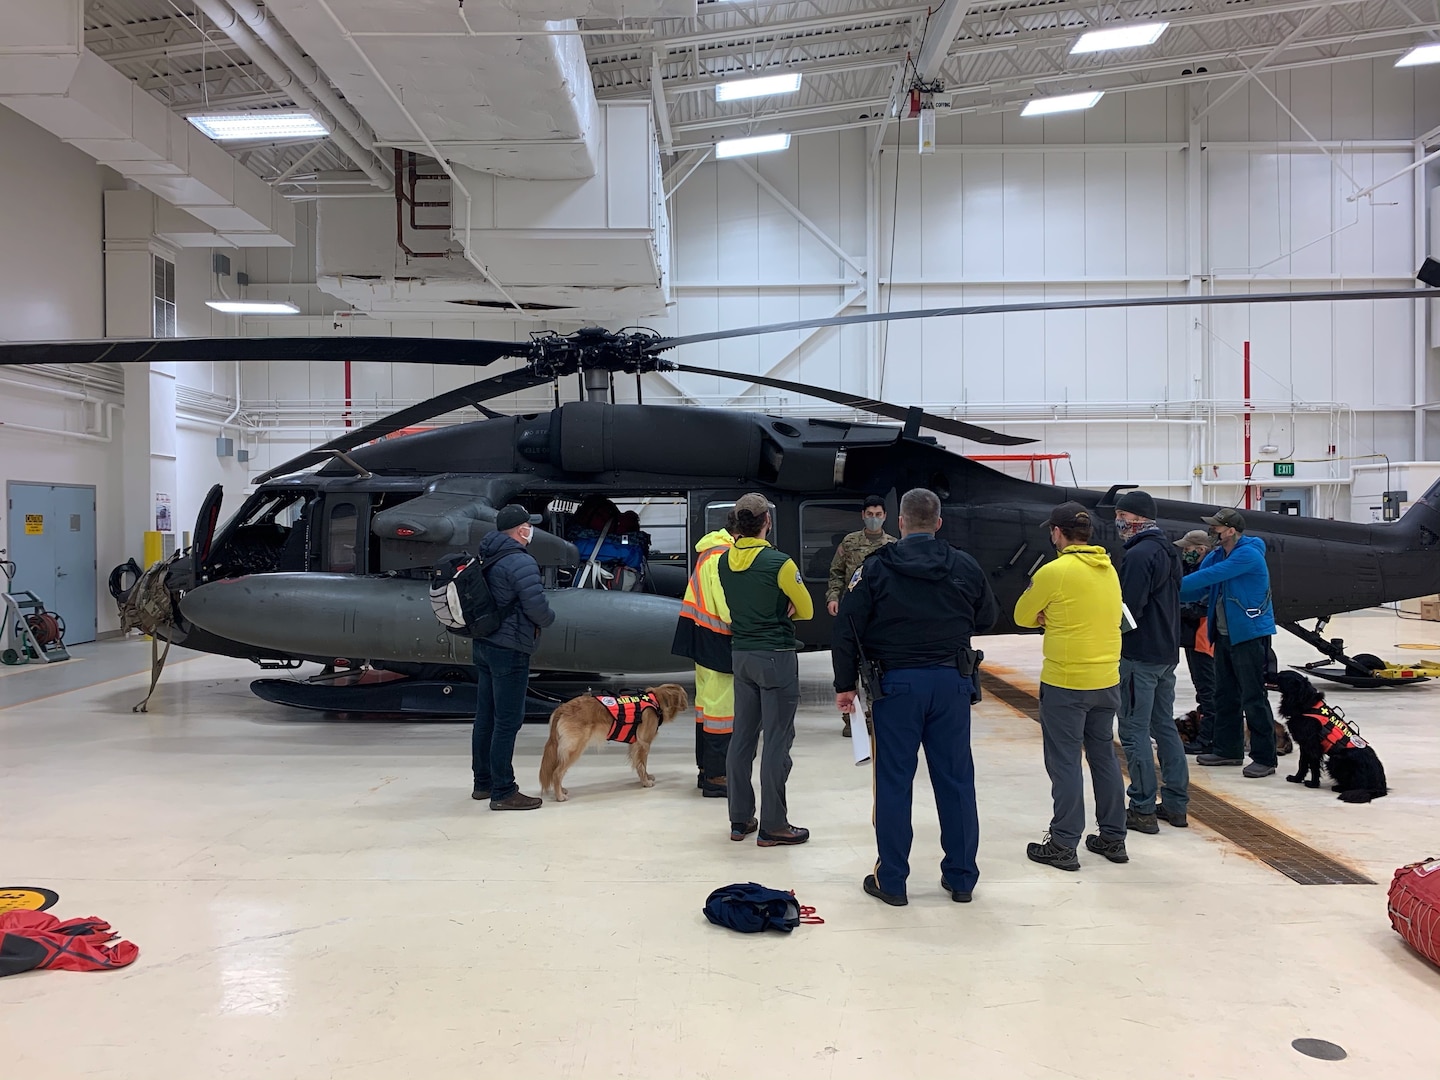 Spc. Thomas James, UH-60 Black Hawk crew chief with the Alaska Army National Guard, conducts a passenger briefing before departure from the Juneau Airport December 3, 2020.